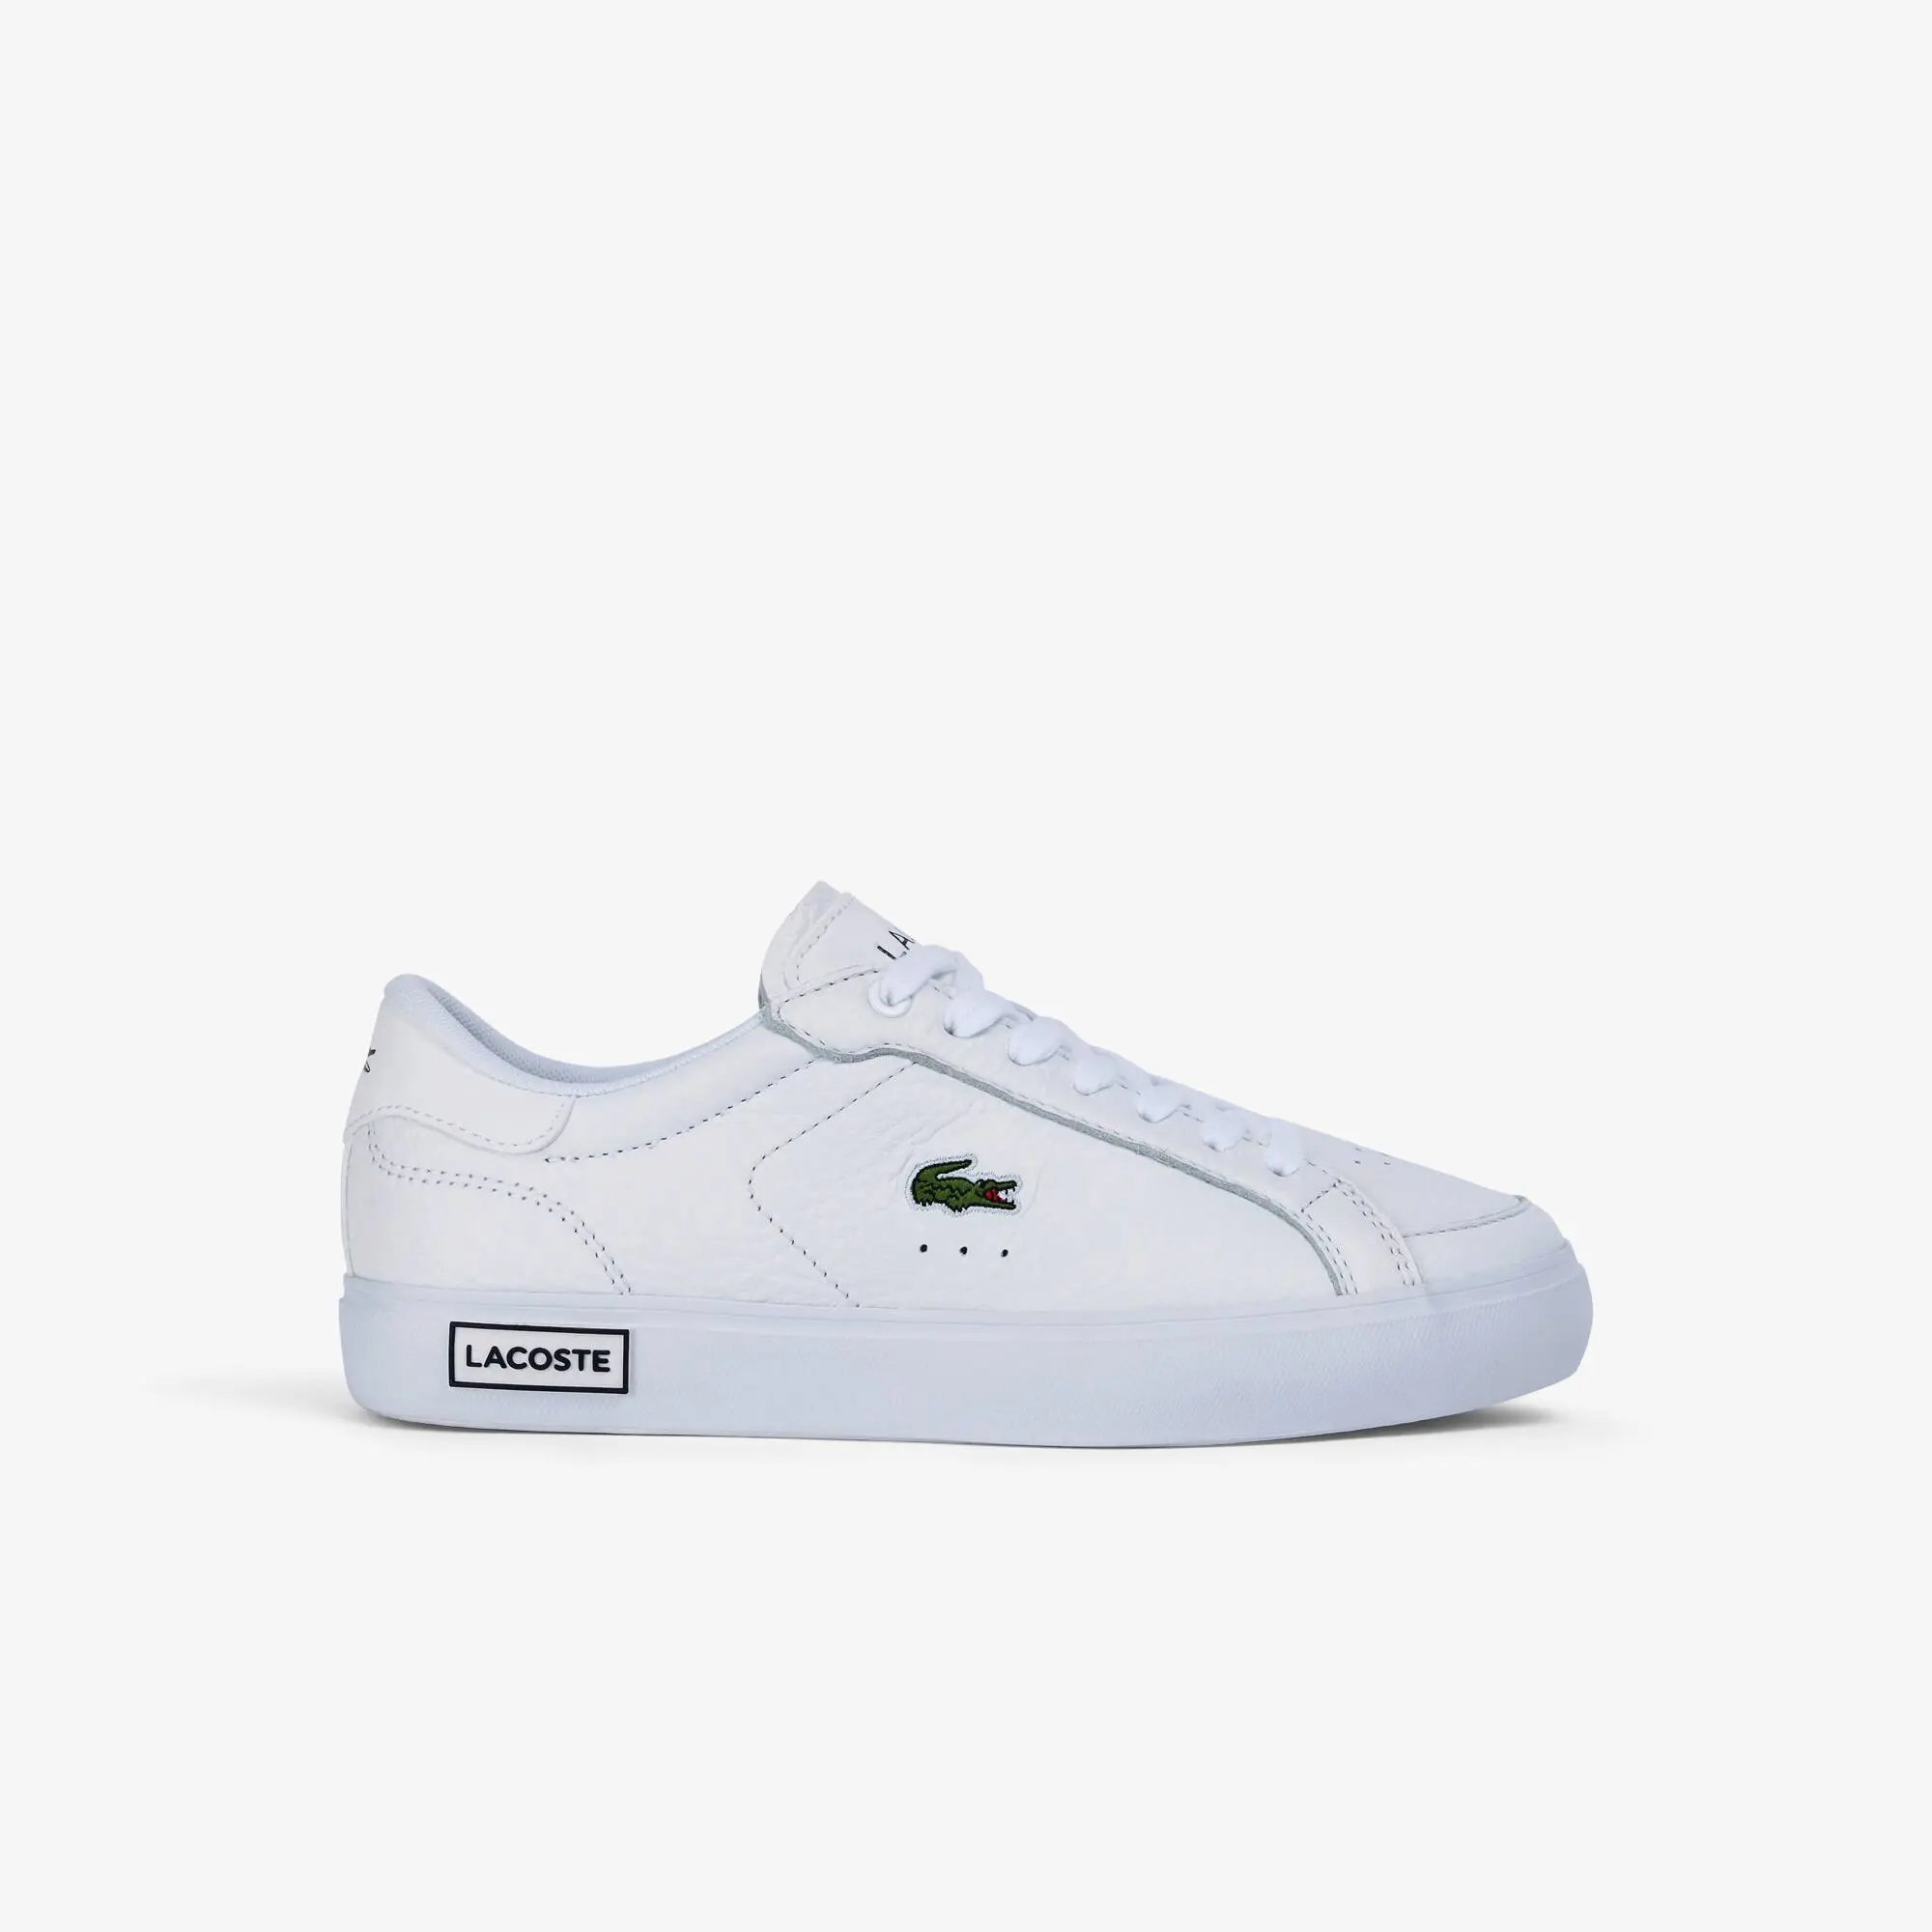 Lacoste Women's Lacoste Powercourt Leather Considered Detailing Trainers. 1